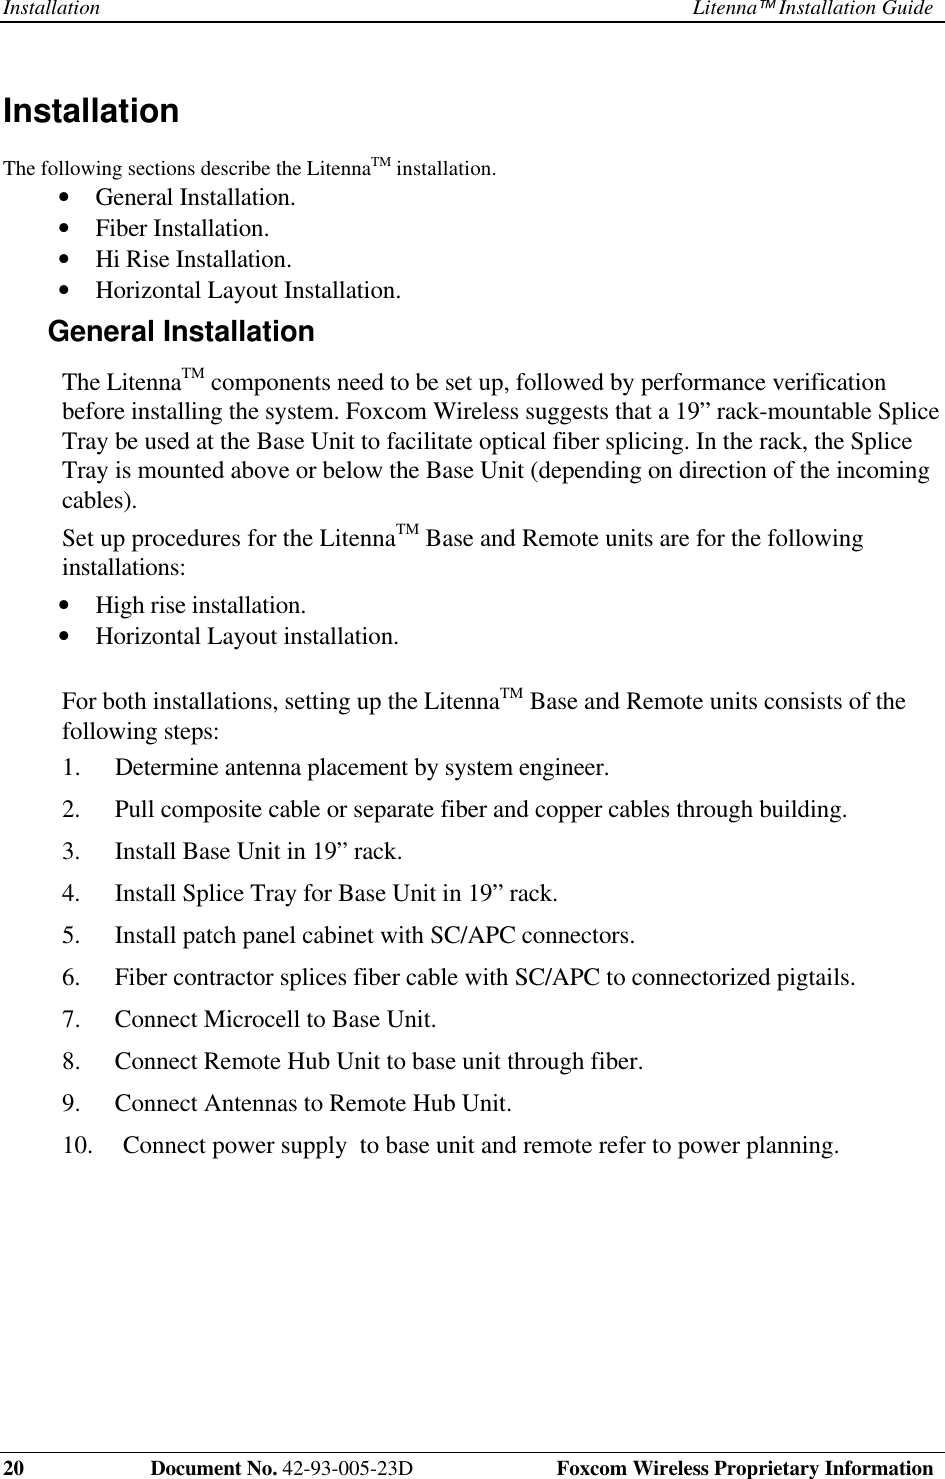 Installation Litenna Installation Guide20    Document No. 42-93-005-23D  Foxcom Wireless Proprietary InformationInstallation The following sections describe the LitennaTM installation.•  General Installation.•  Fiber Installation.•  Hi Rise Installation.•  Horizontal Layout Installation.General Installation The  LitennaTM components need to be set up, followed by performance verificationbefore installing the system. Foxcom Wireless suggests that a 19” rack-mountable SpliceTray be used at the Base Unit to facilitate optical fiber splicing. In the rack, the SpliceTray is mounted above or below the Base Unit (depending on direction of the incomingcables). Set up procedures for the LitennaTM Base and Remote units are for the followinginstallations:•  High rise installation.•  Horizontal Layout installation.  For both installations, setting up the LitennaTM Base and Remote units consists of thefollowing steps:1.  Determine antenna placement by system engineer.2.  Pull composite cable or separate fiber and copper cables through building.3.  Install Base Unit in 19” rack.4.  Install Splice Tray for Base Unit in 19” rack.5.  Install patch panel cabinet with SC/APC connectors.6.  Fiber contractor splices fiber cable with SC/APC to connectorized pigtails.7.  Connect Microcell to Base Unit.8.  Connect Remote Hub Unit to base unit through fiber.9.  Connect Antennas to Remote Hub Unit.10.  Connect power supply  to base unit and remote refer to power planning.